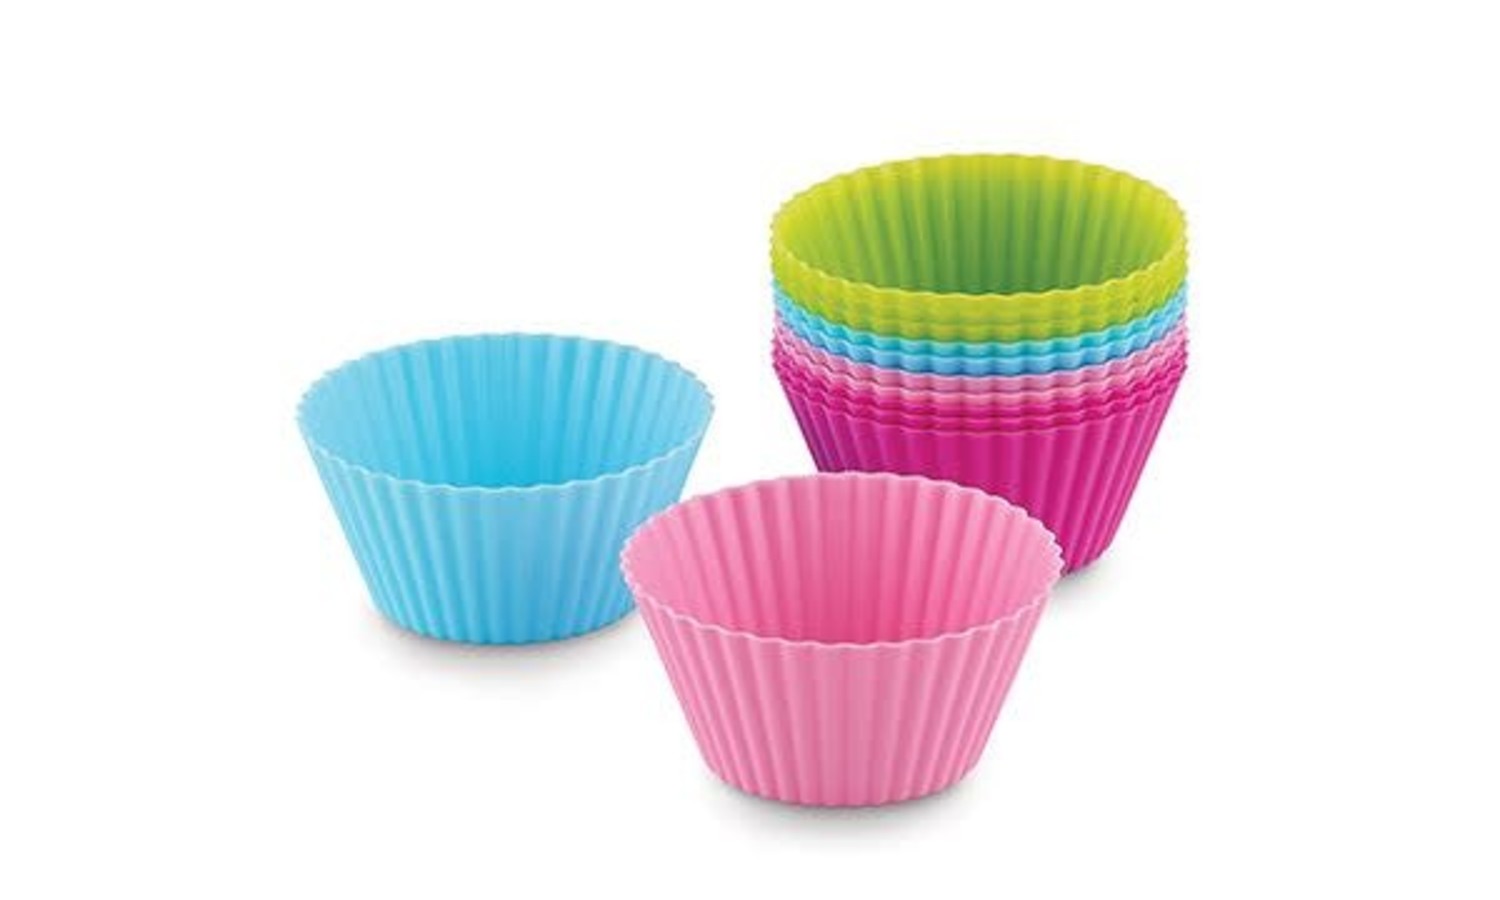 Silicone Baking Cups, set of 12 - Whisk